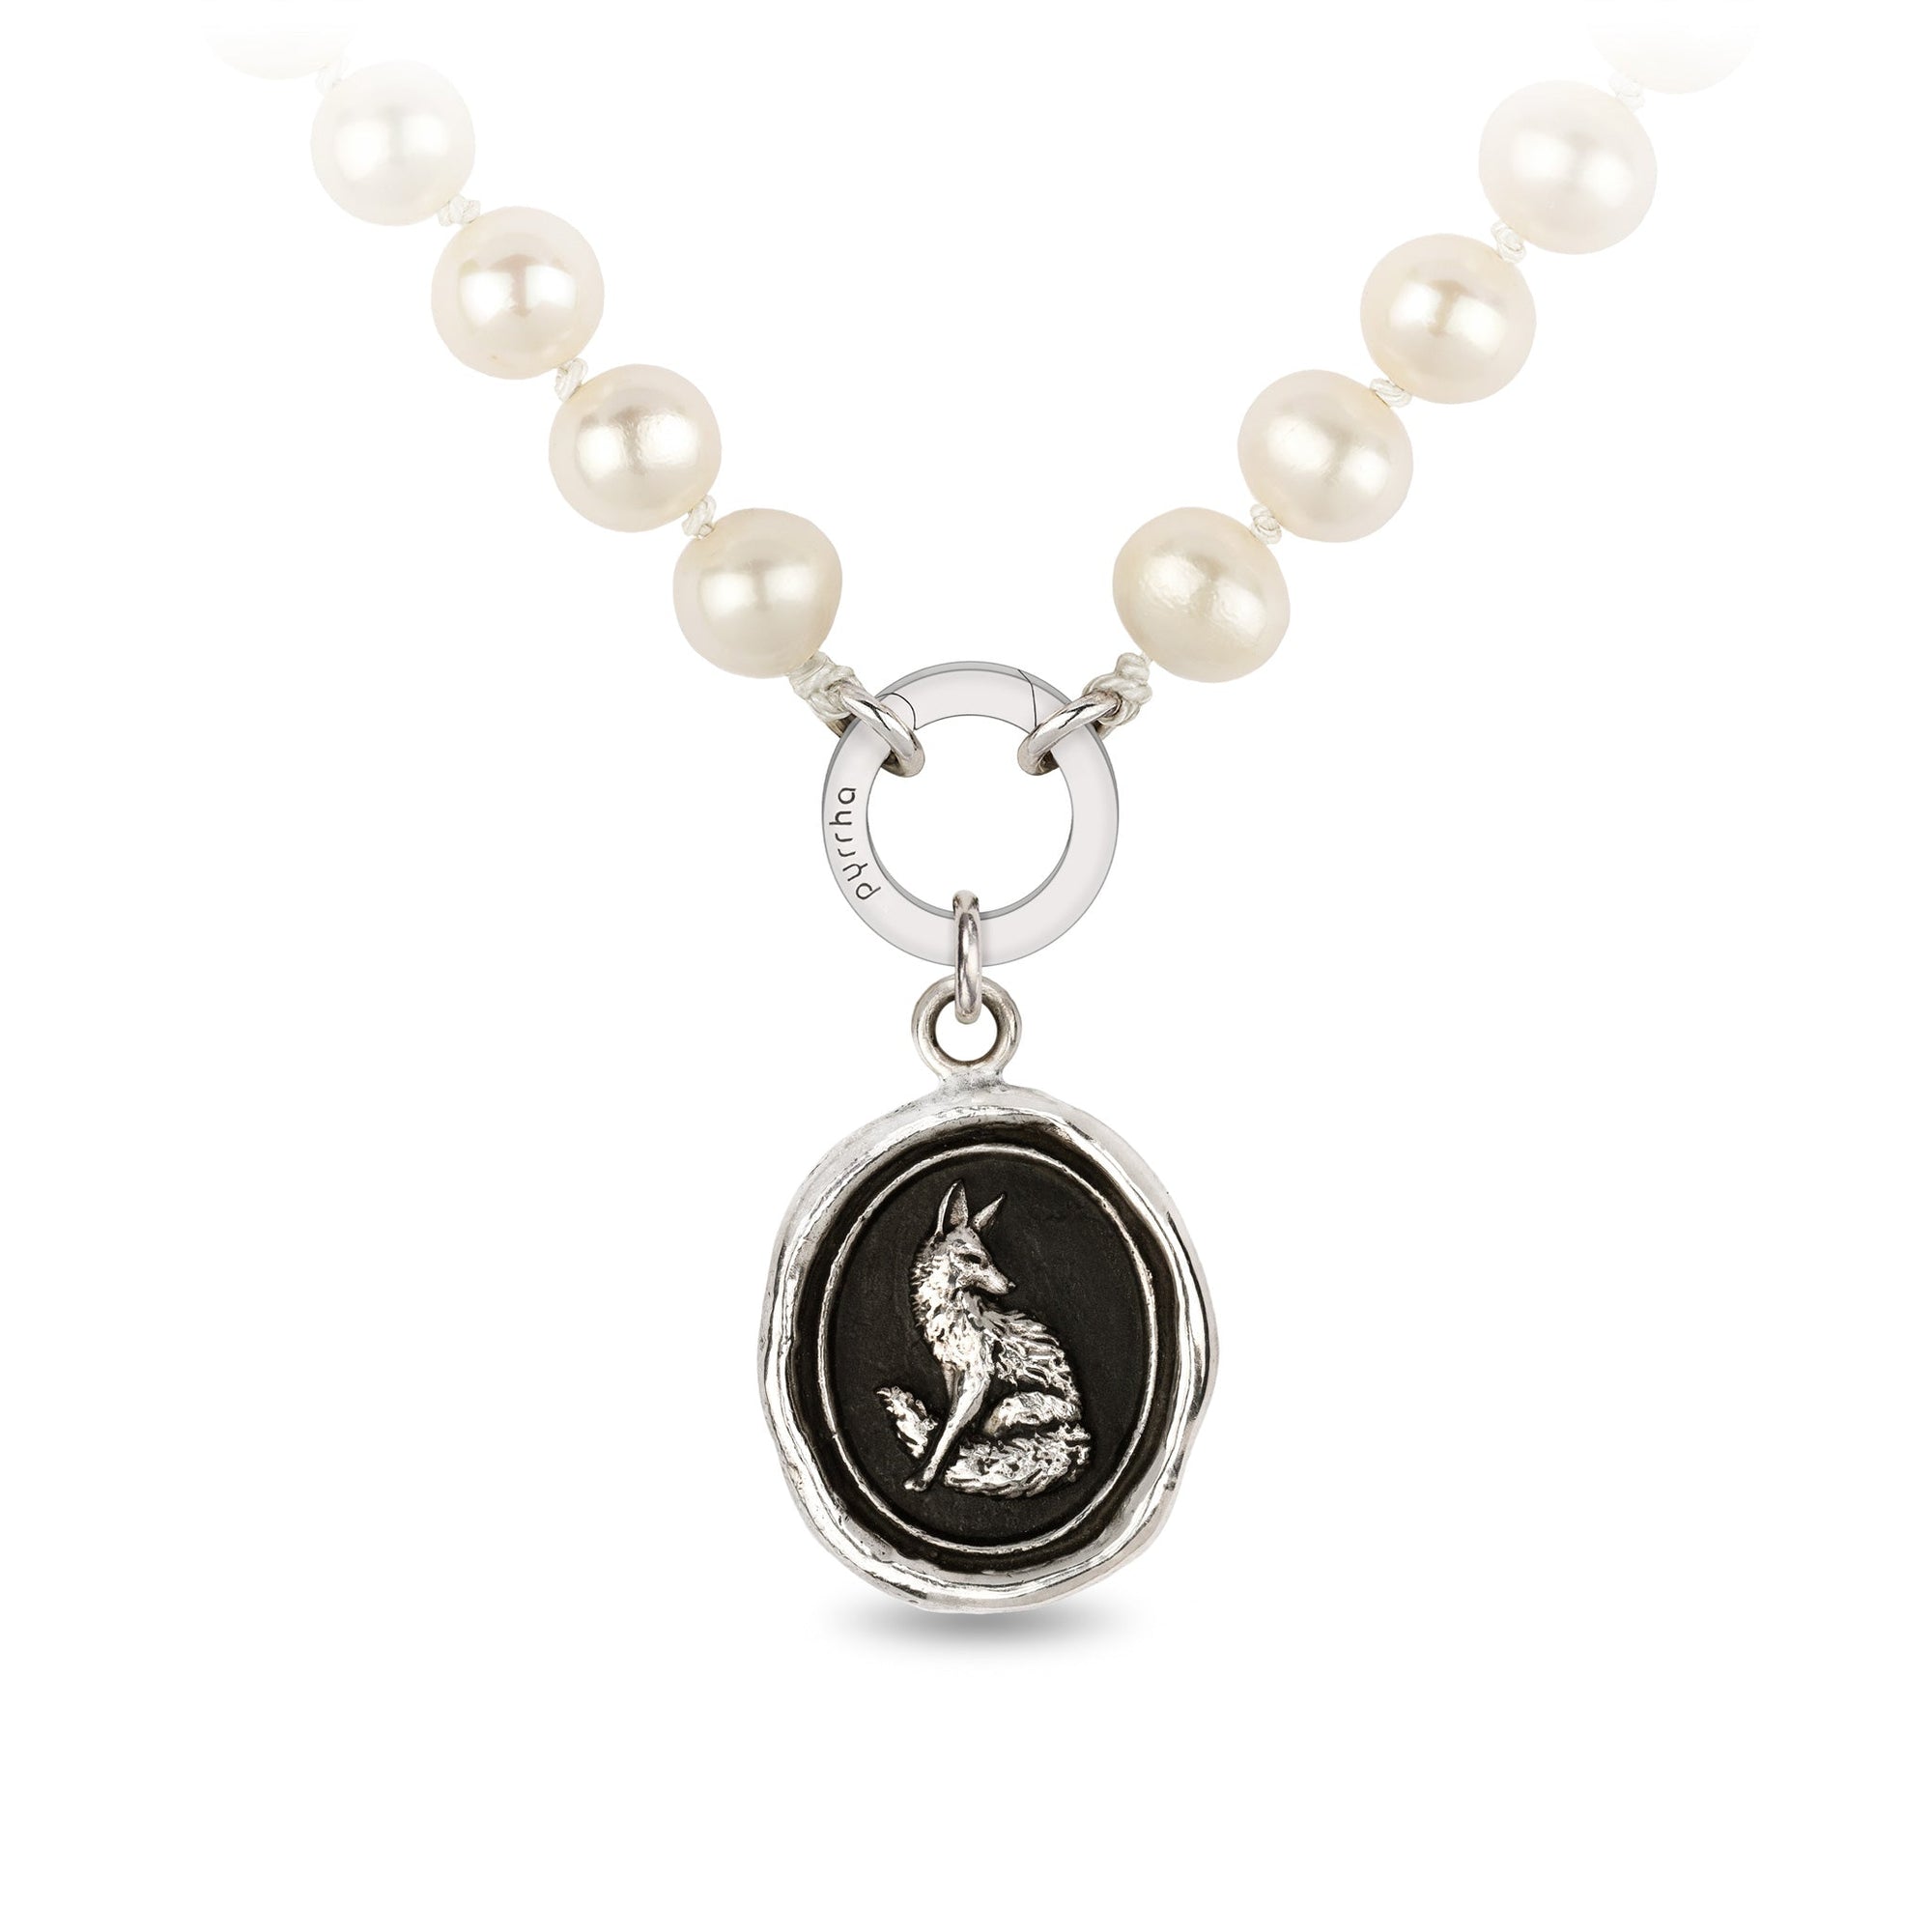 Trust in Yourself Knotted Freshwater Pearl Necklace